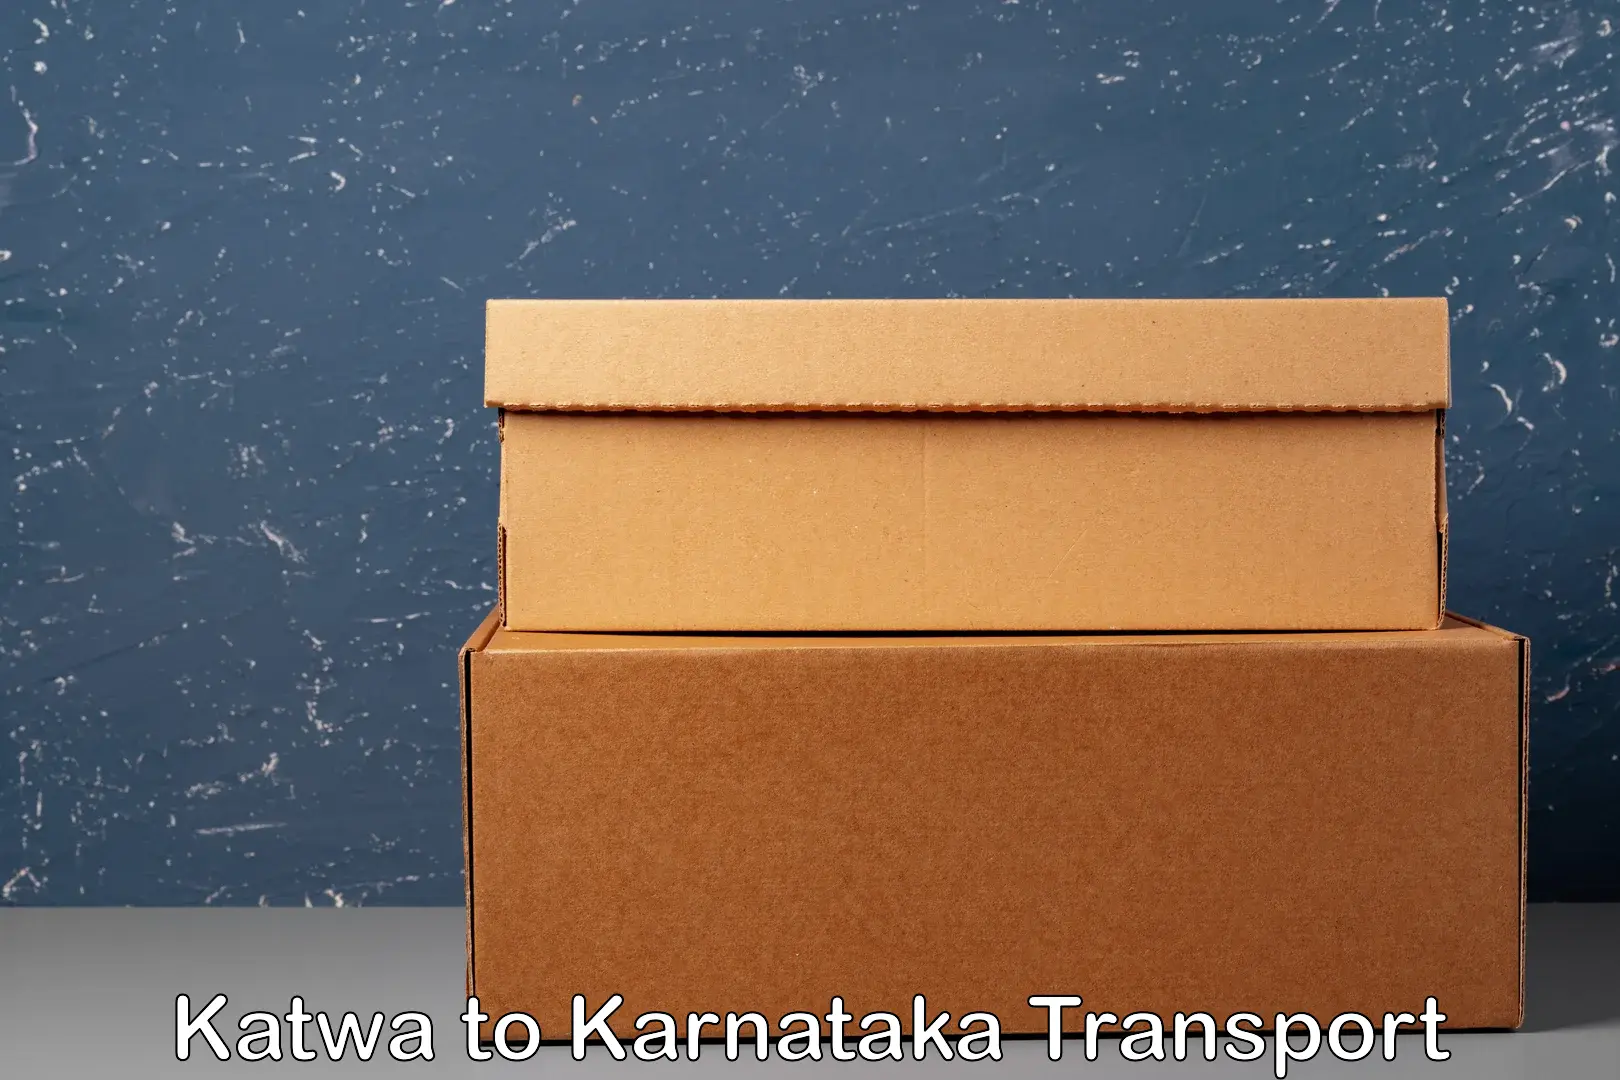 Air cargo transport services in Katwa to Channagiri